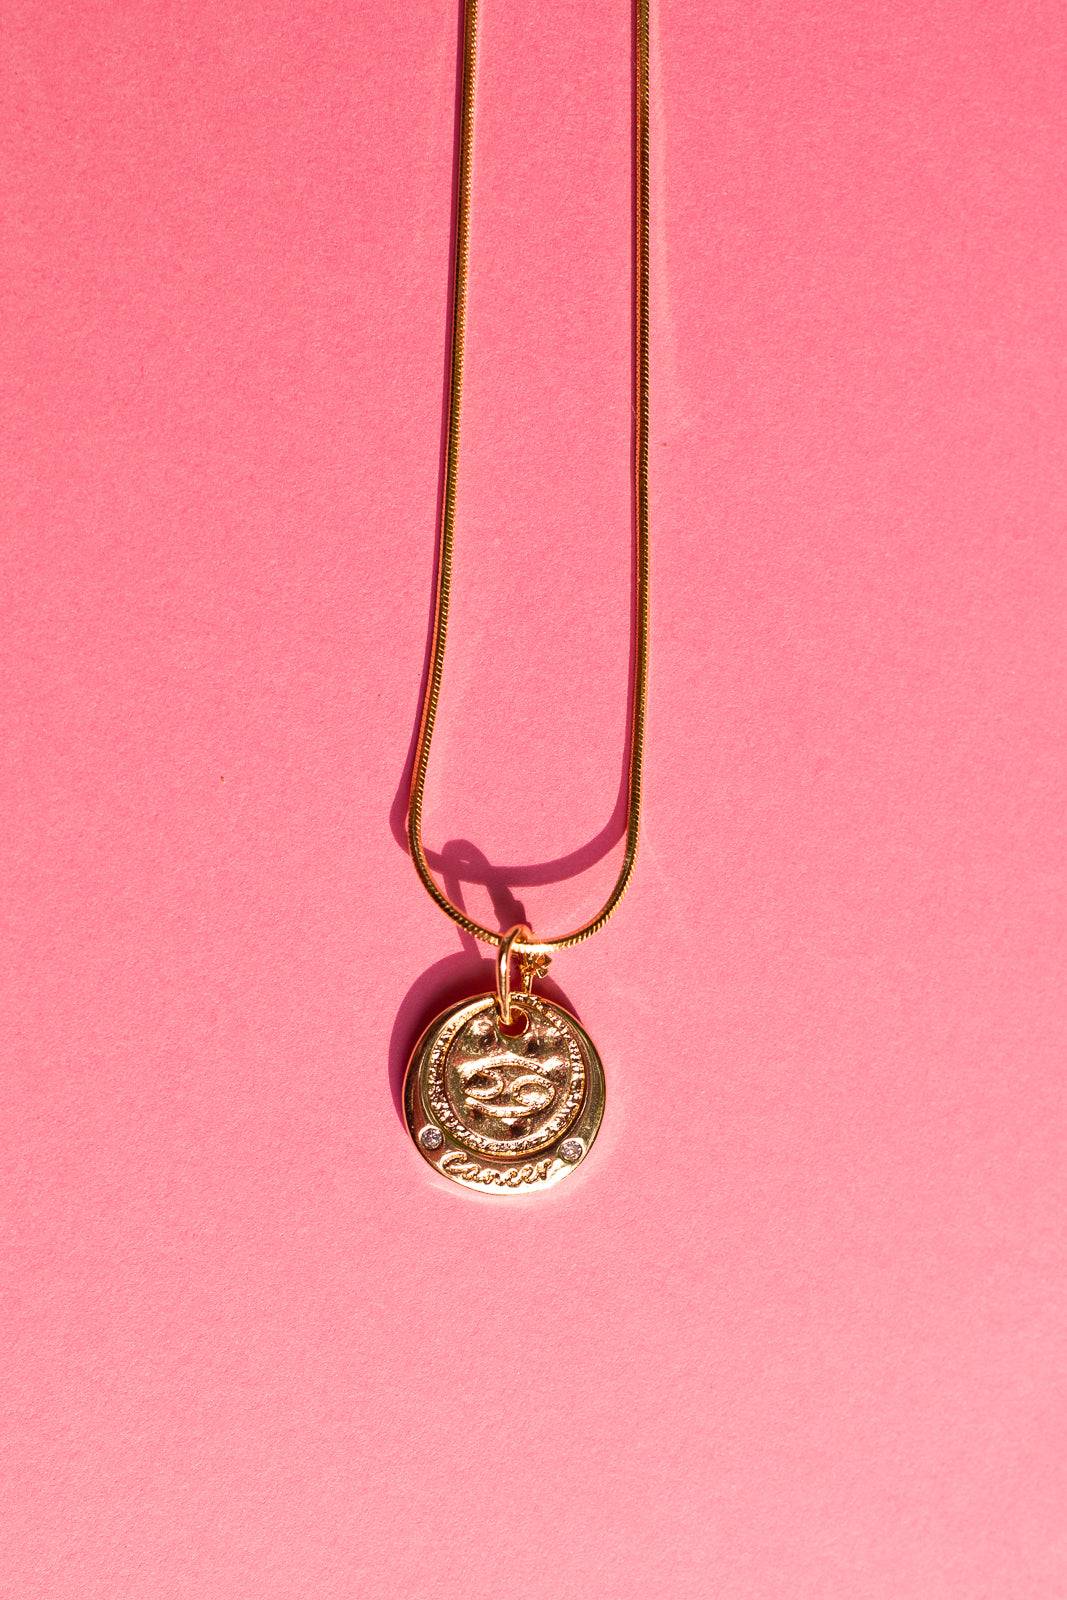 Zodiac Coin Necklace *GOLD FILLED*